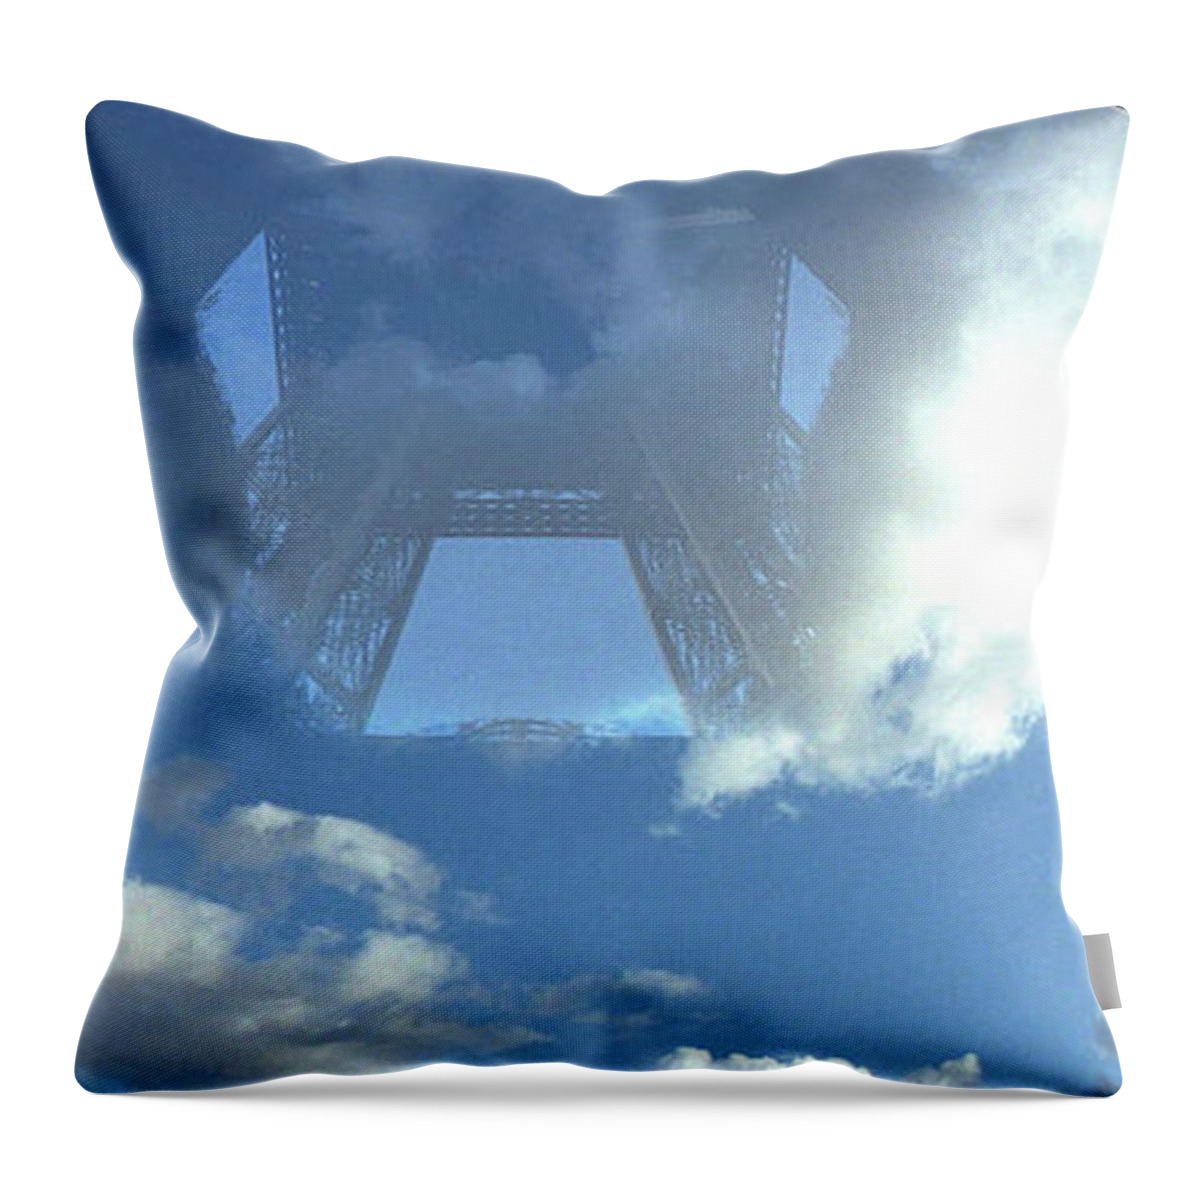 Panoramic Throw Pillow featuring the photograph Multiple Images Of A Tower, Eiffel by Win-initiative/neleman